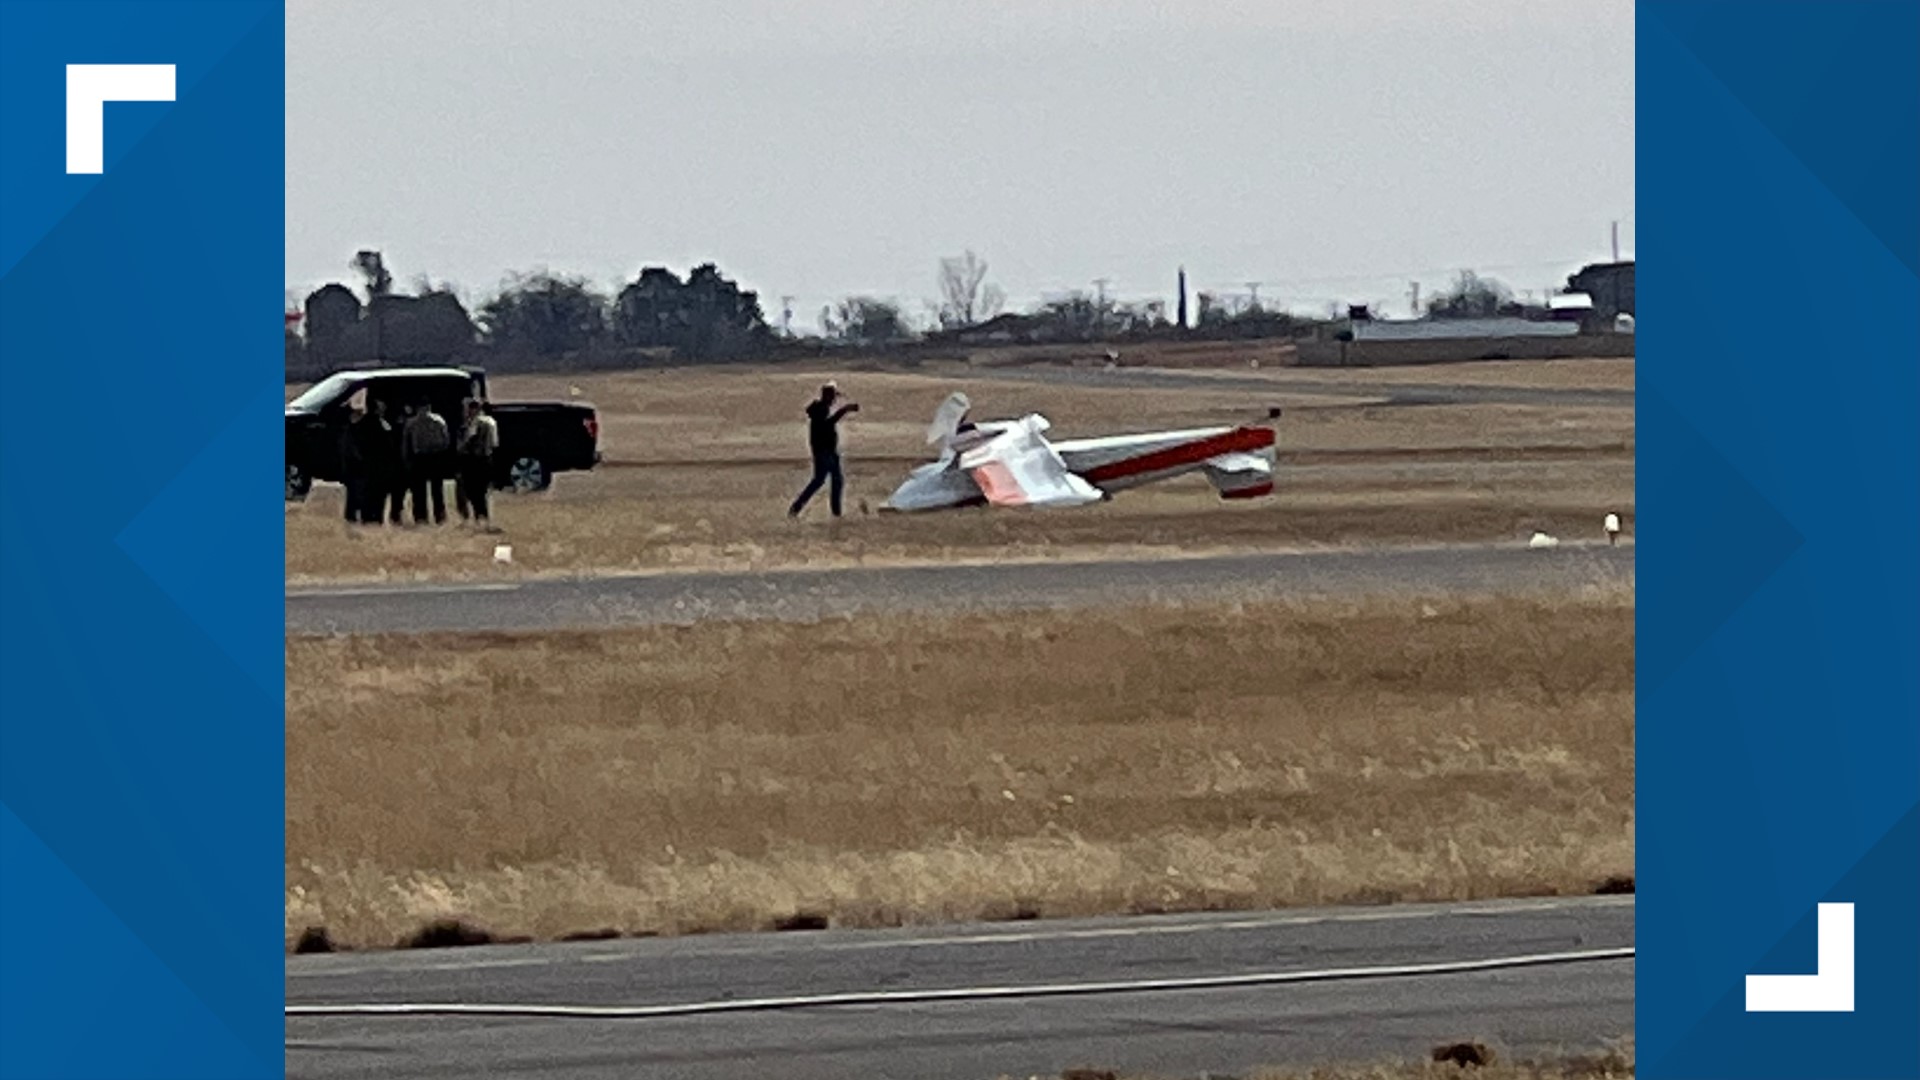 The pilot sustained non-life threatening injuries and was released from the hospital today, according to the Permian Regional Medical Center.